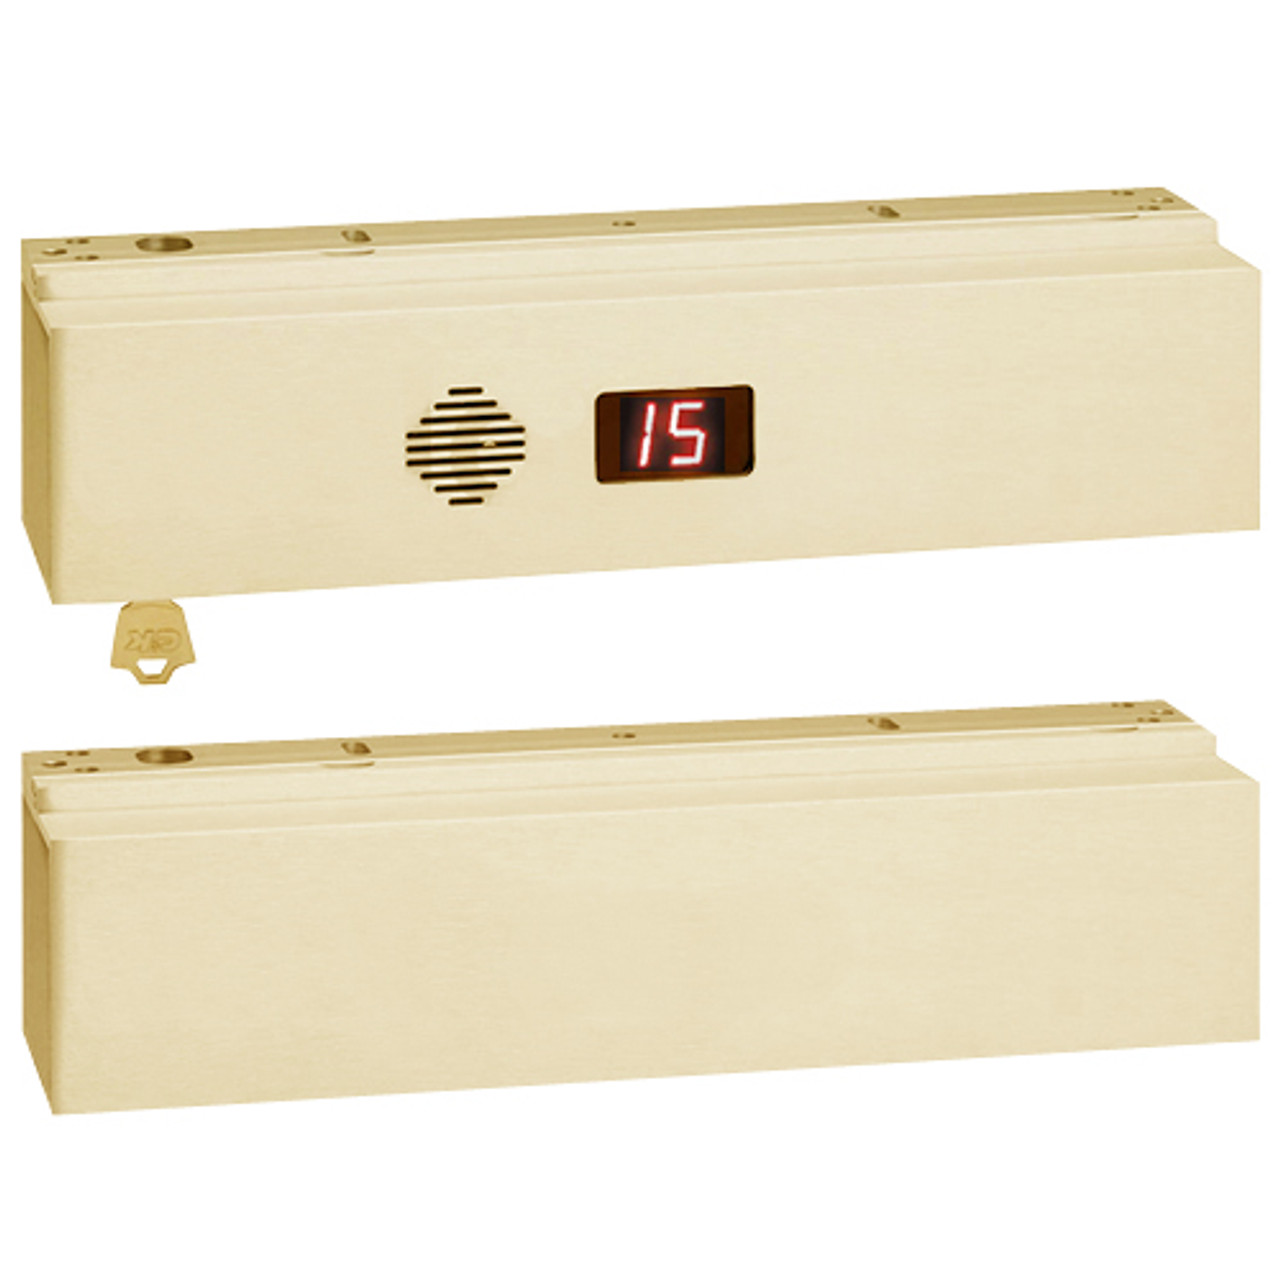 1511T-BD-K-C-B2A2 SDC 1511T Series Tandem Integrated Delayed Egress Locks with Magnetic Bond Sensor and Anti-Tamper Switch in Brass Powder